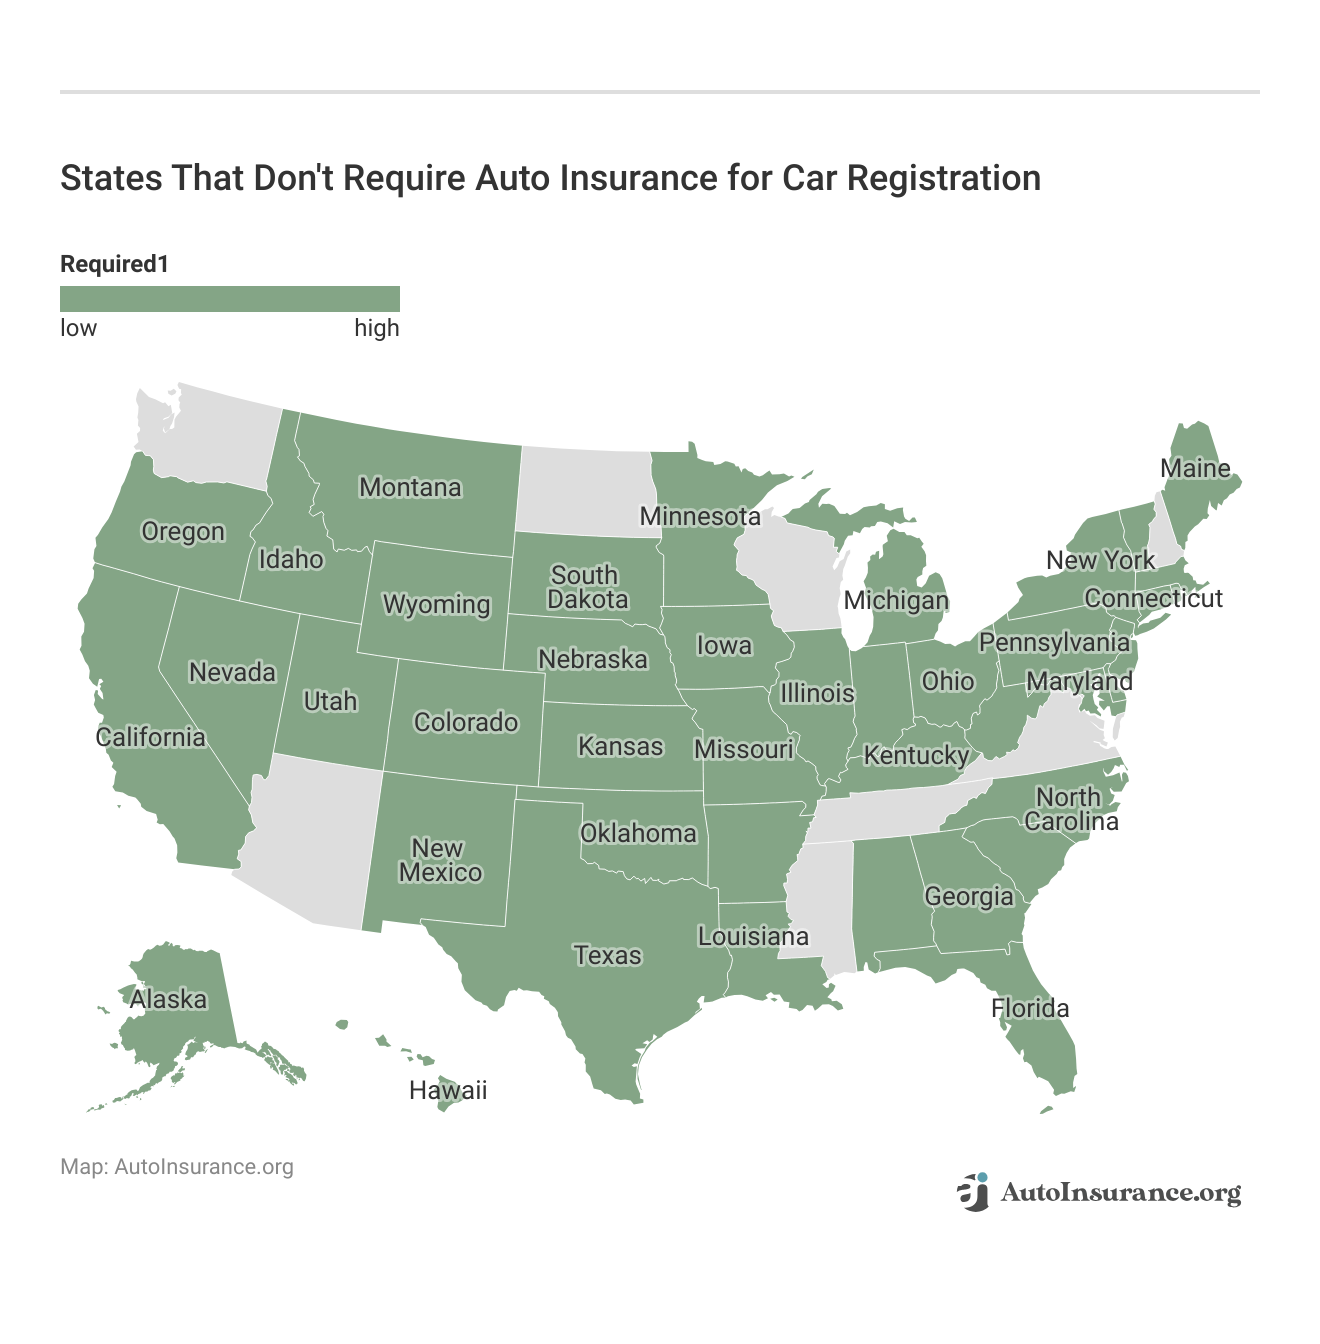 <h3>States That Don't Require Auto Insurance for Car Registration</h3>